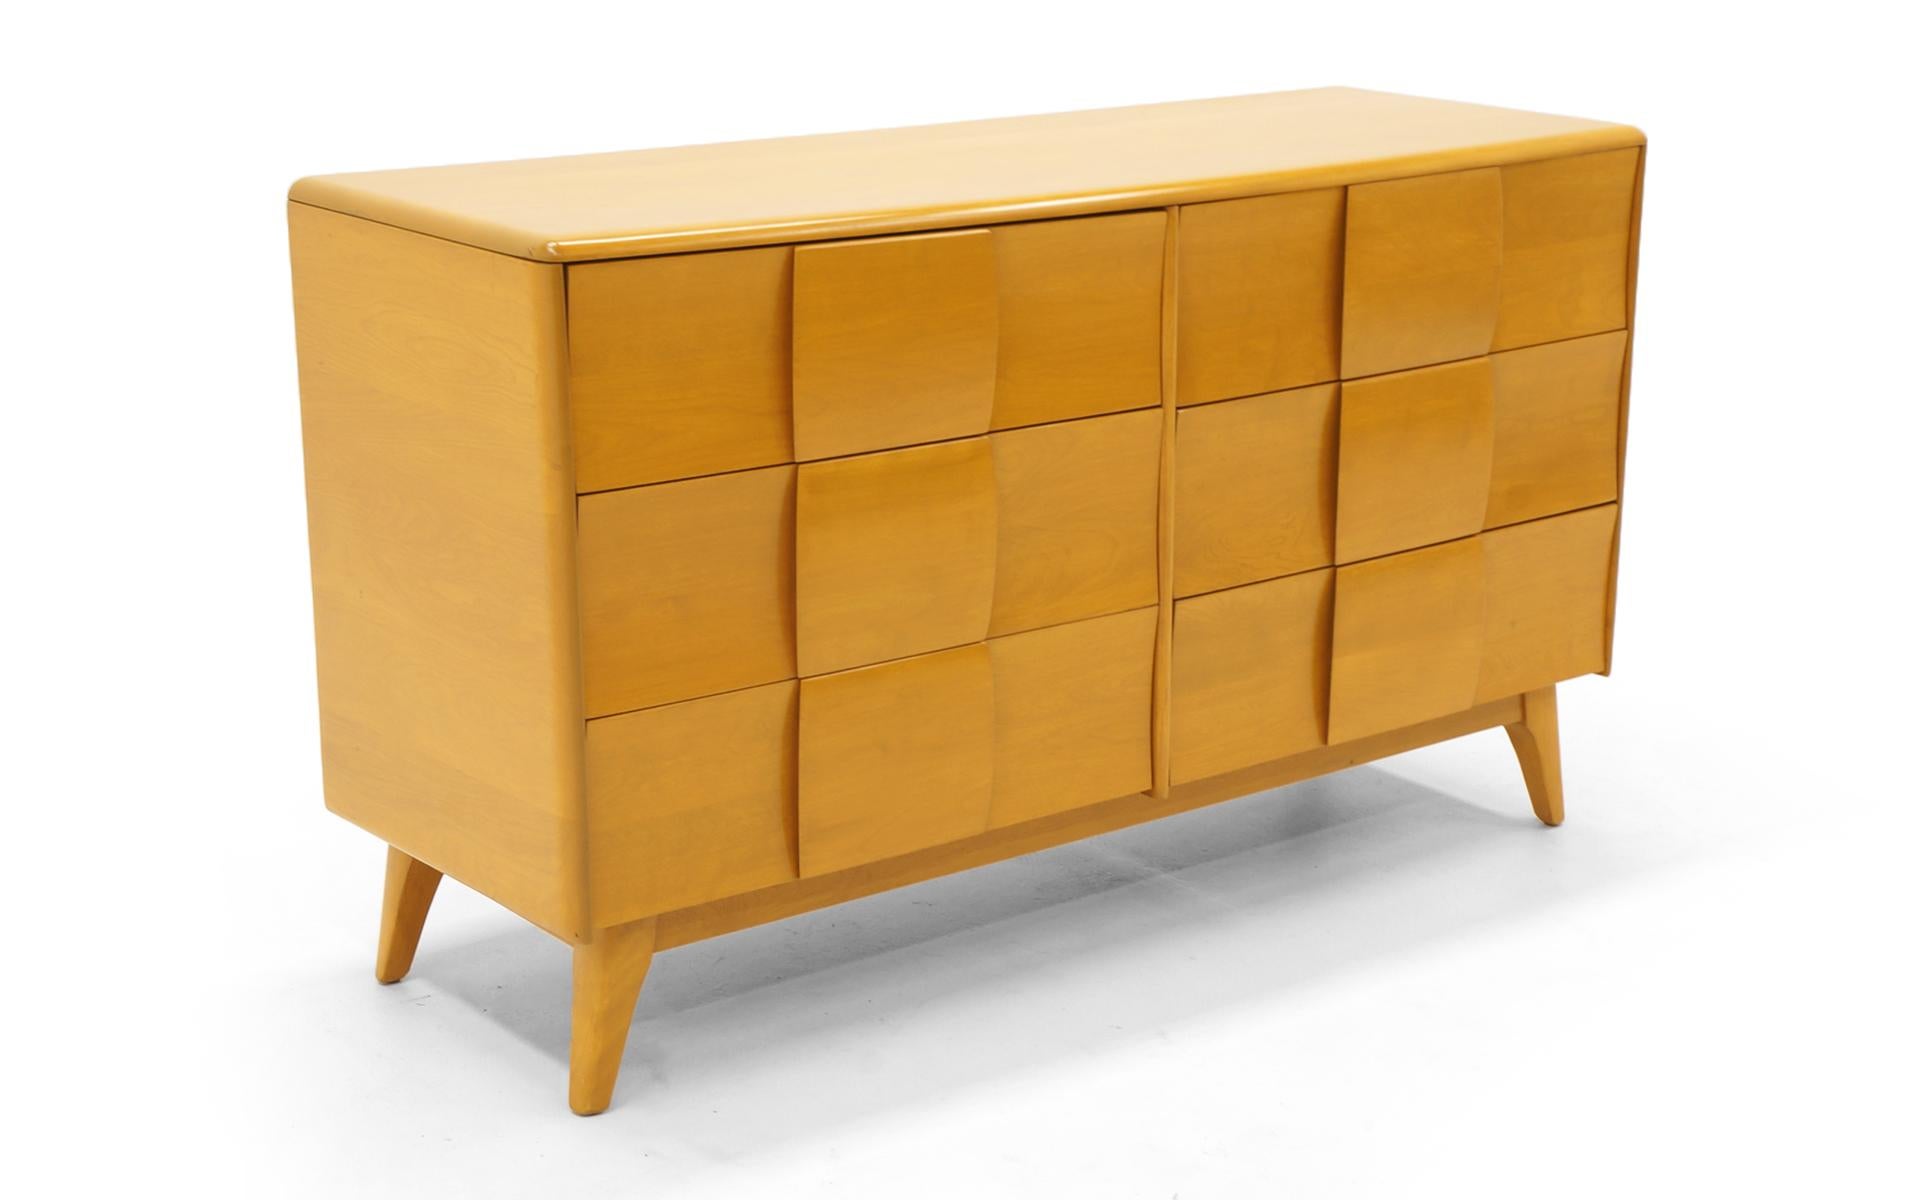 Heywood Wakefield six-drawer dresser in Wheat finish. The Sculptura line is the only Heywood Wakefield designs we buy and sell. Striking looks and great functionality. Solid birch construction. We have a listing for the same dresser in Champagne